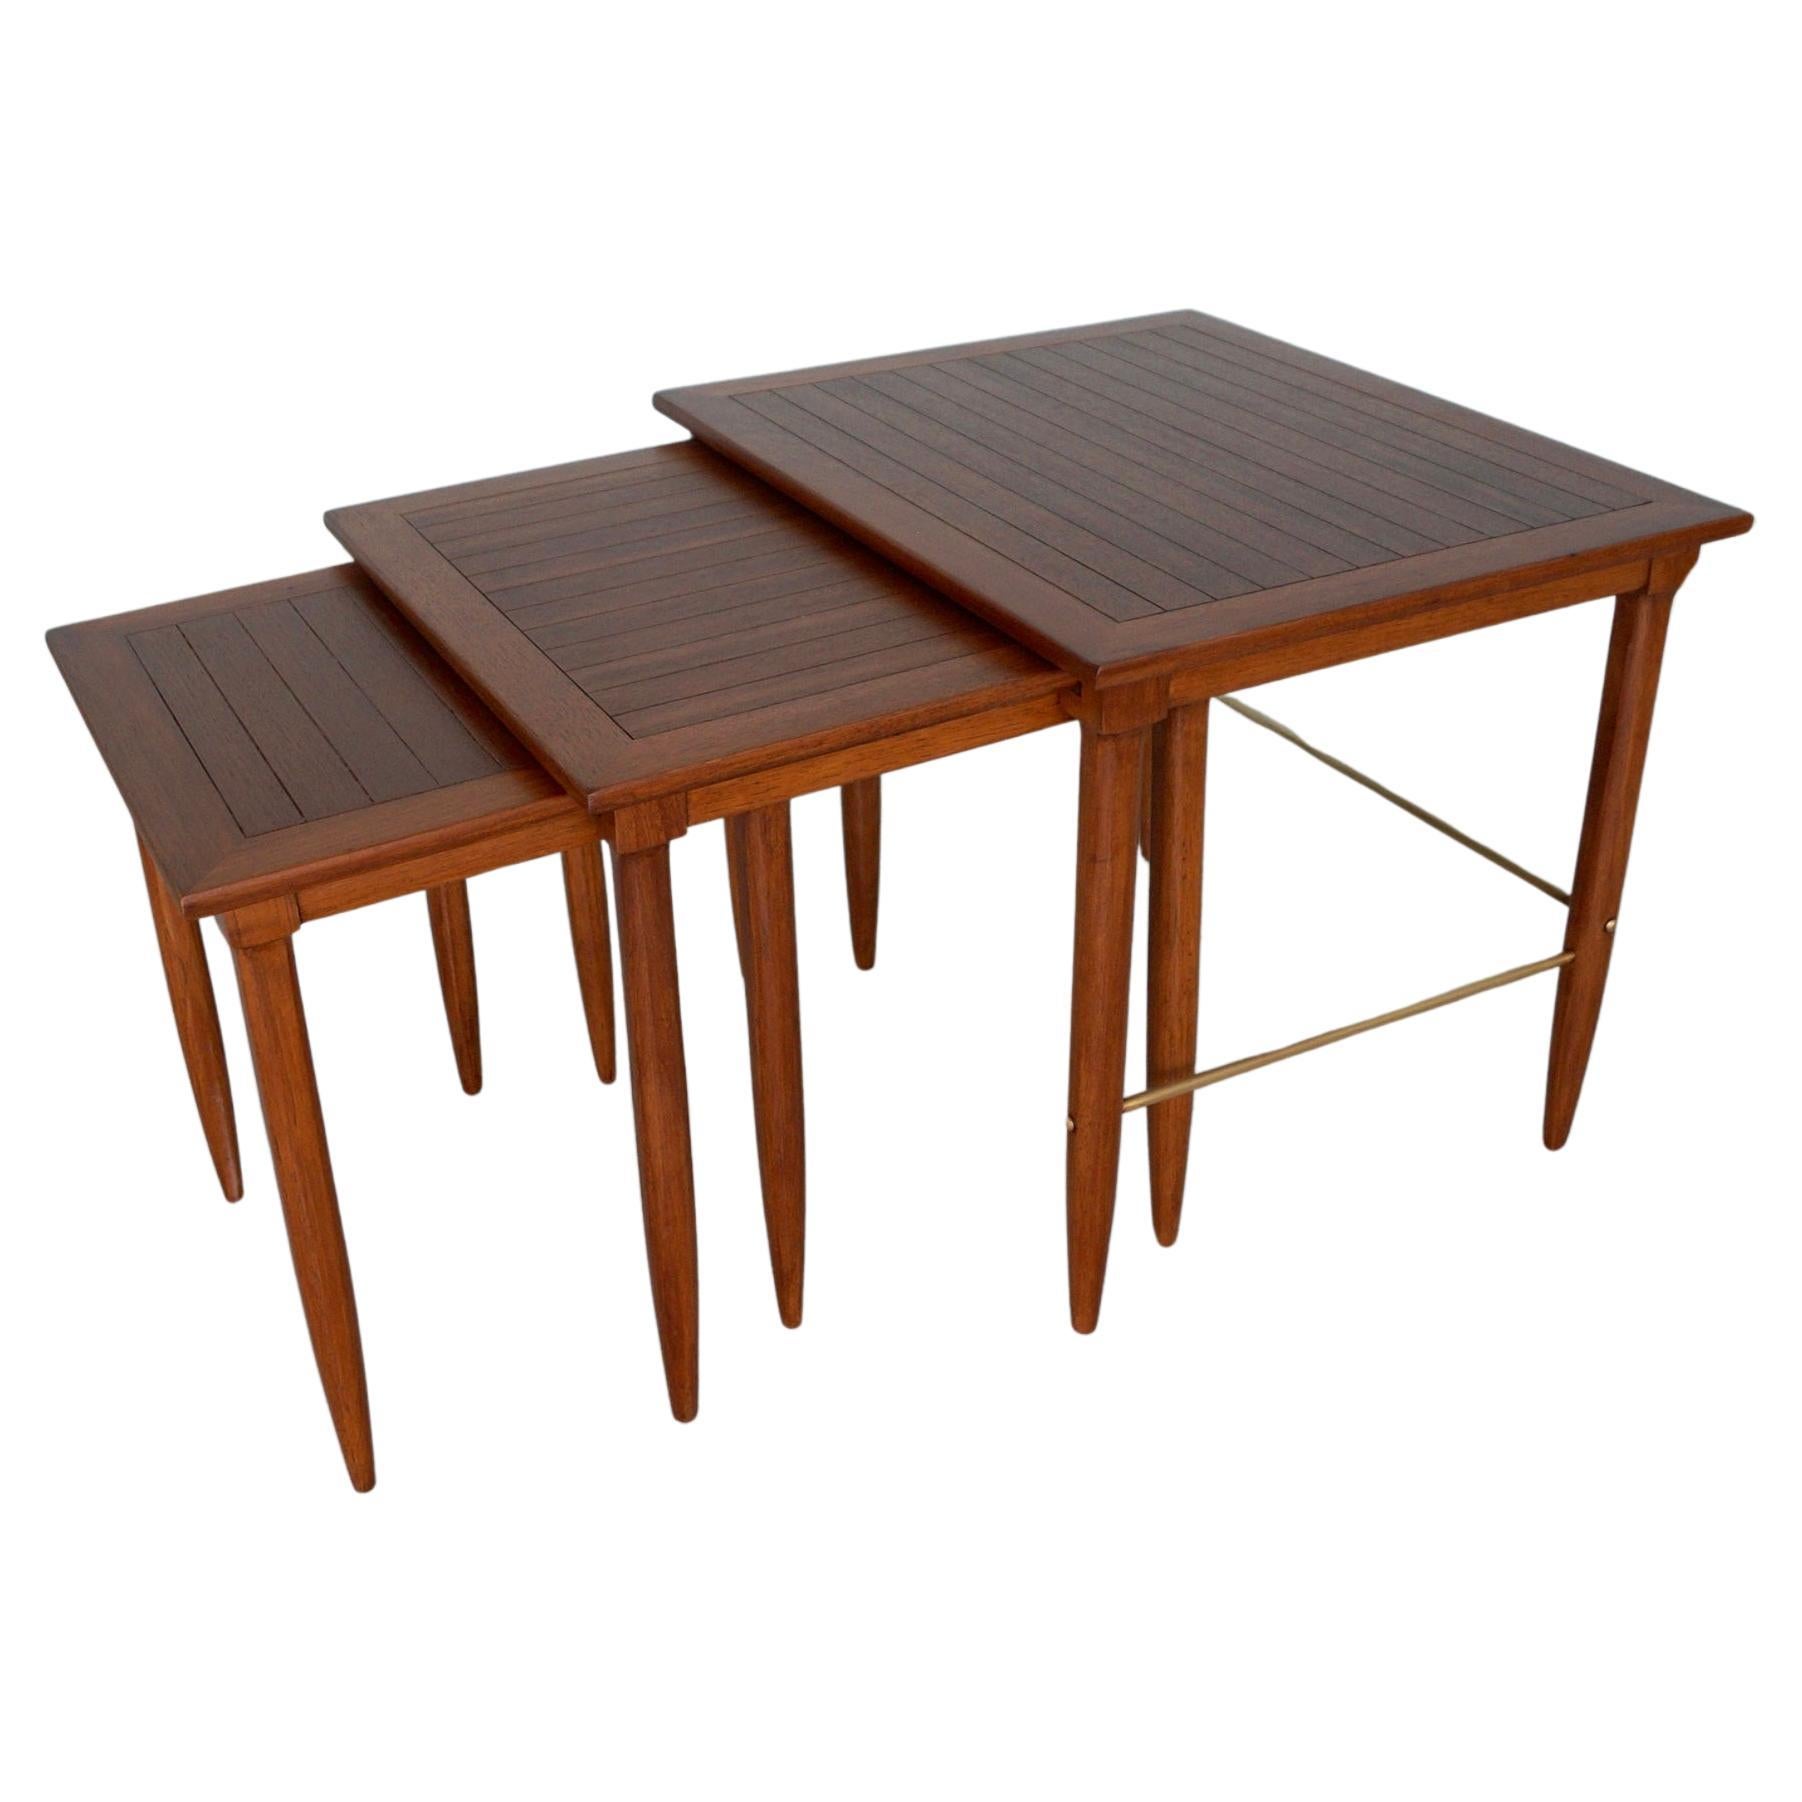 1950's Mid-Century Modern Set of 3 Nesting Tables by Tomlinson For Sale